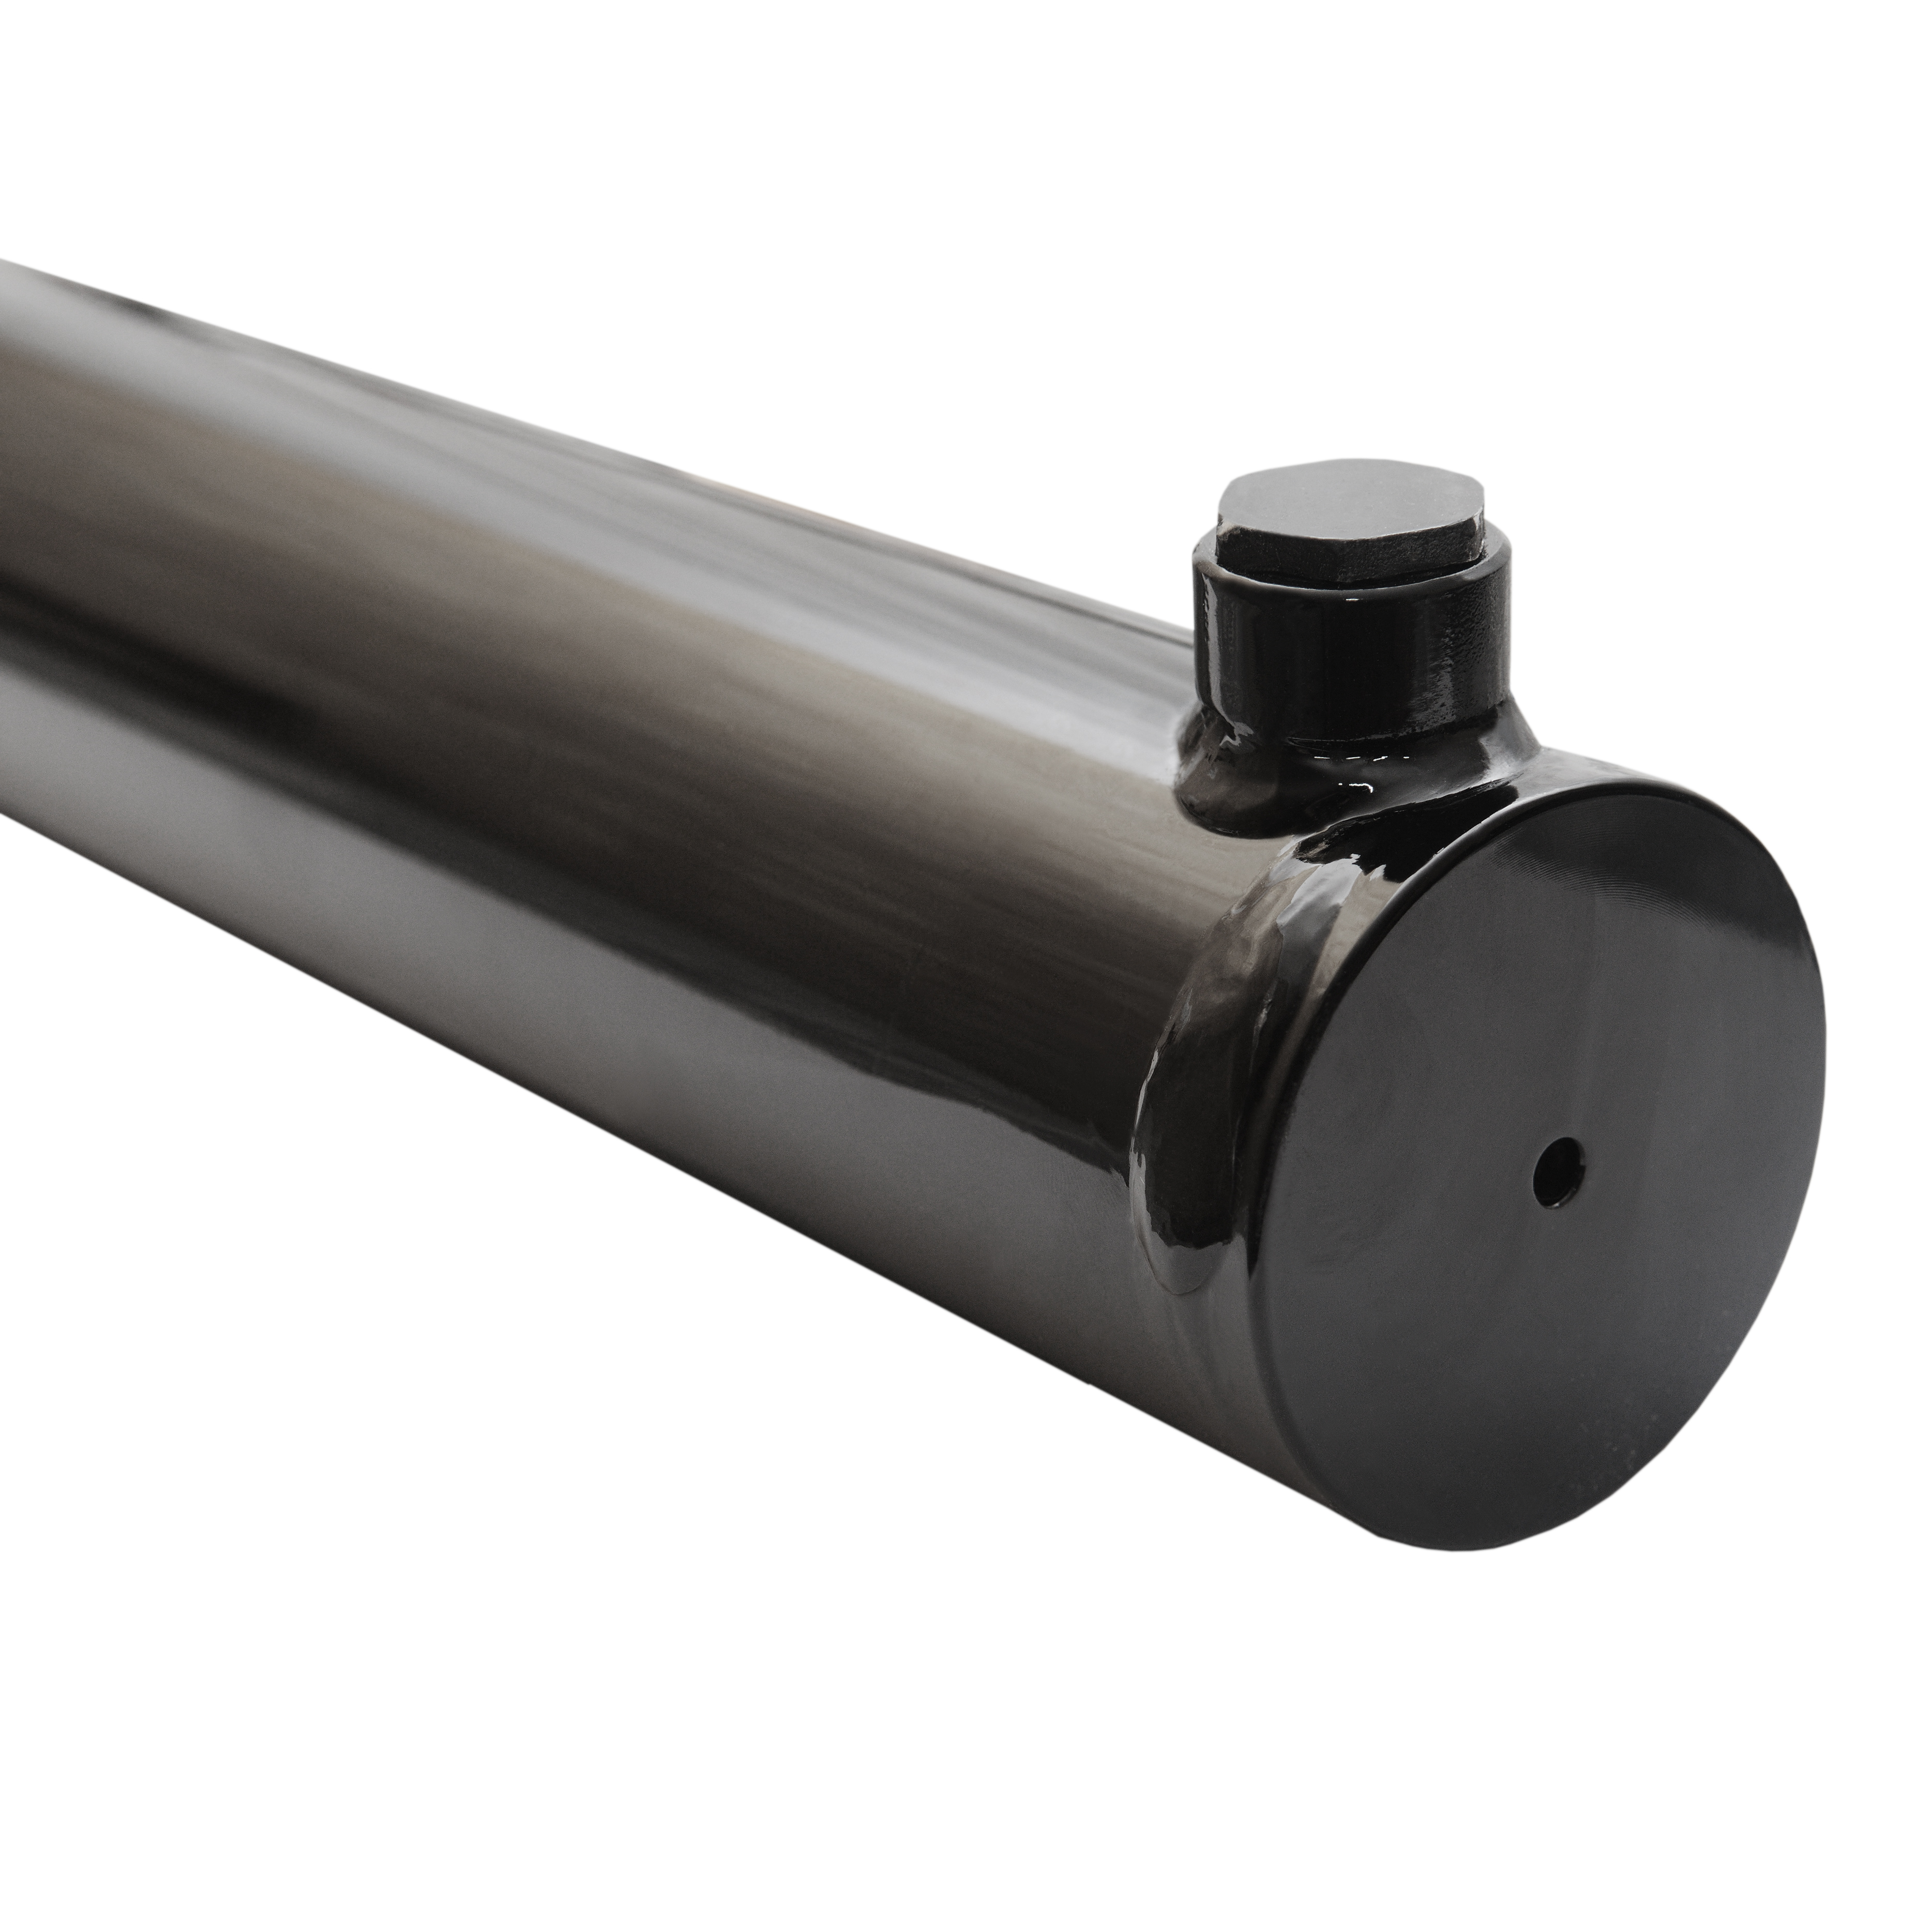 2.5 bore x 23 stroke hydraulic cylinder, welded universal double acting cylinder | Magister Hydraulics